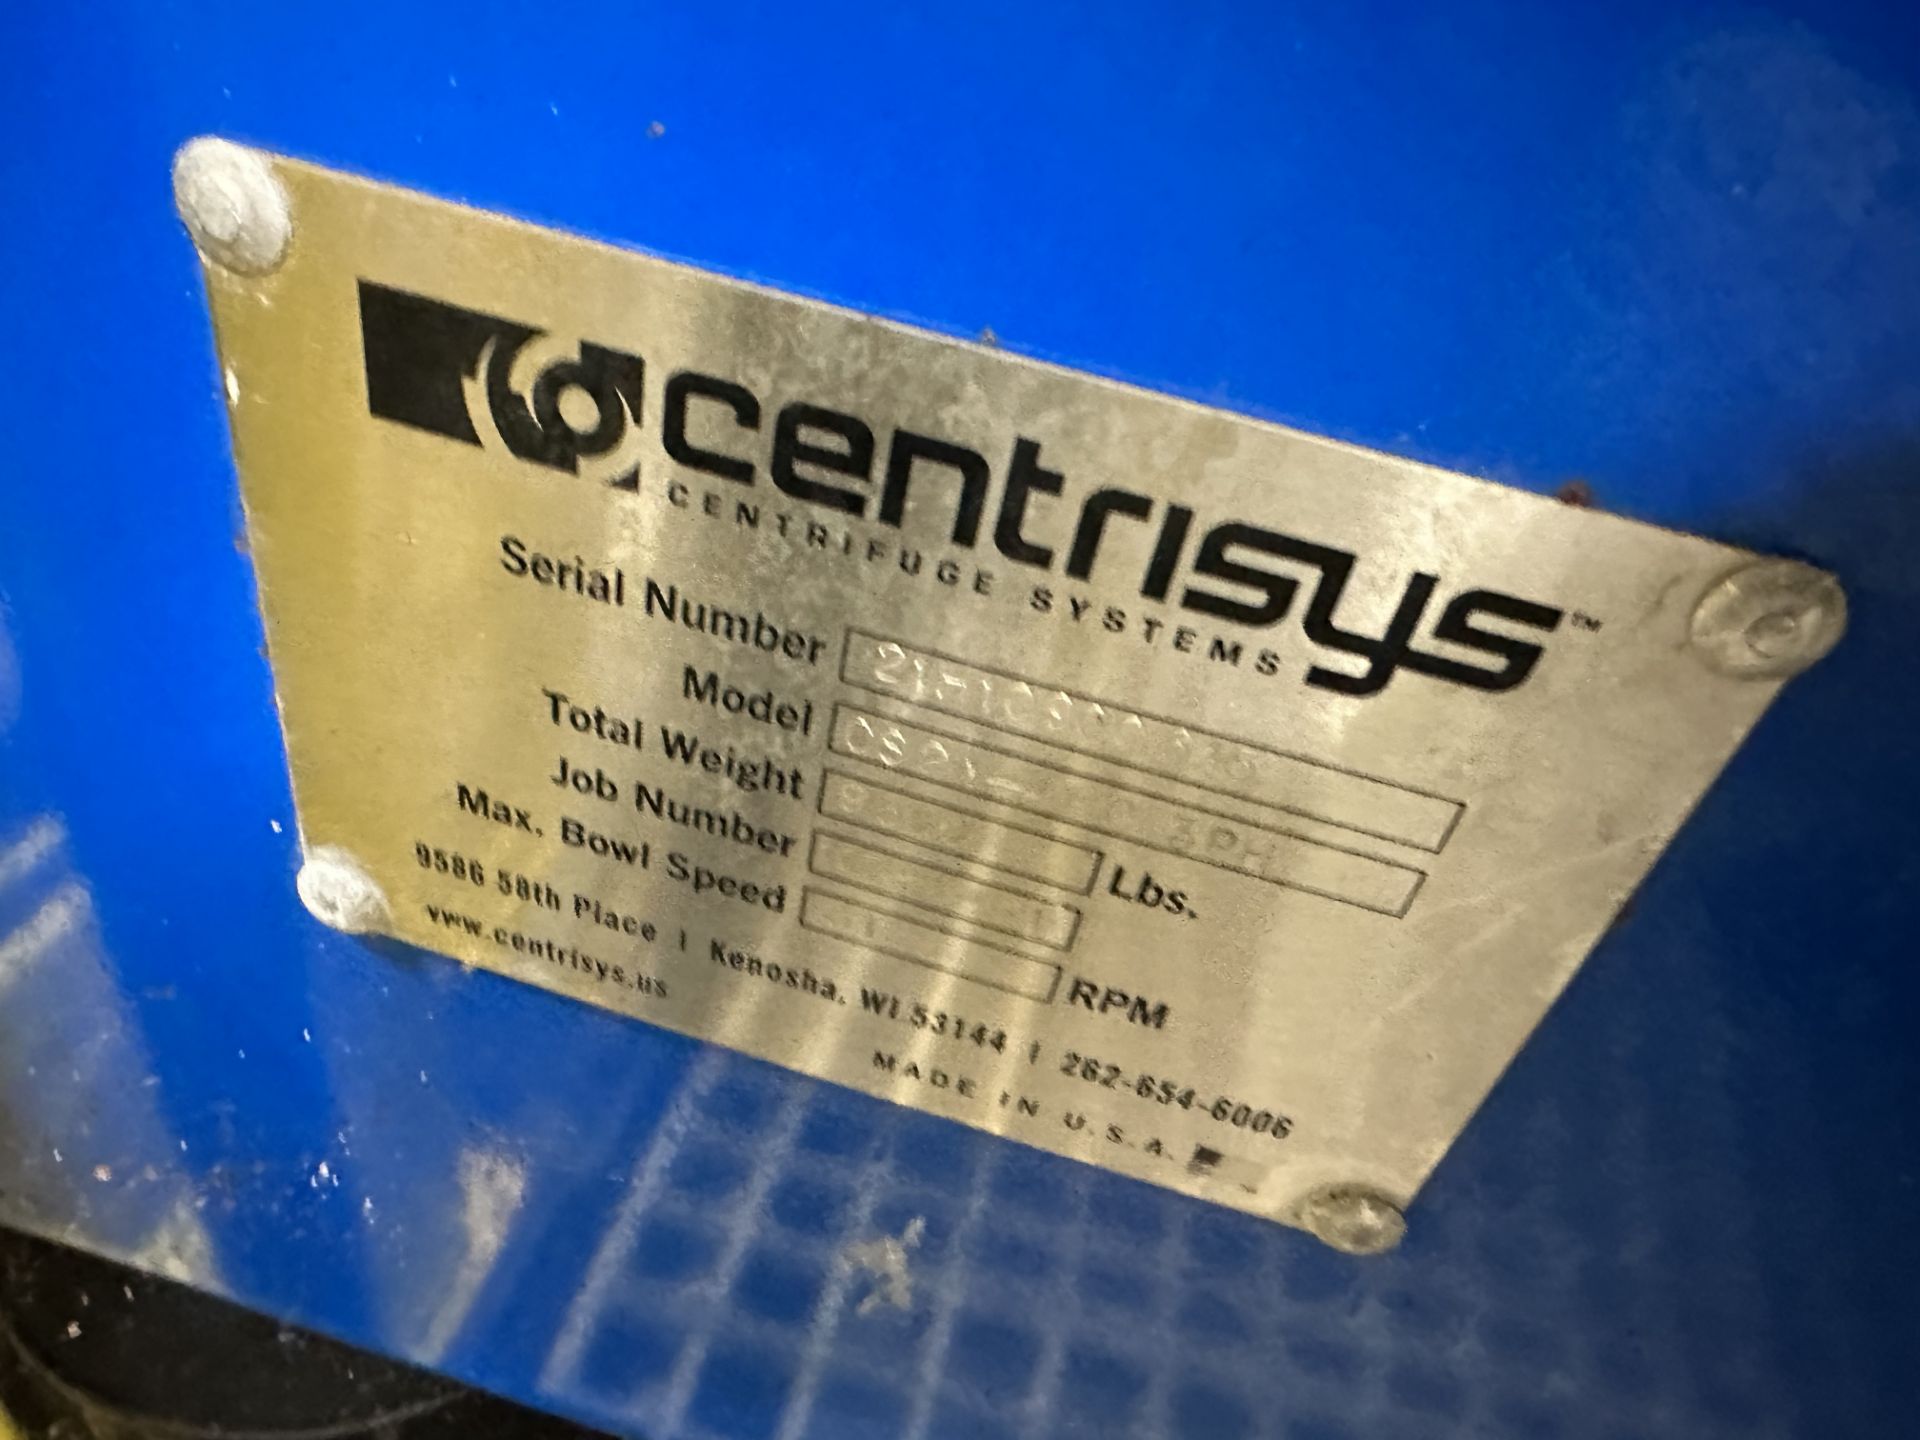 Centrisys Dewatering Decanter Centrifuge - Model CS21-4HC S/N......Cleaned. Tarp to keep debris Free - Image 2 of 5